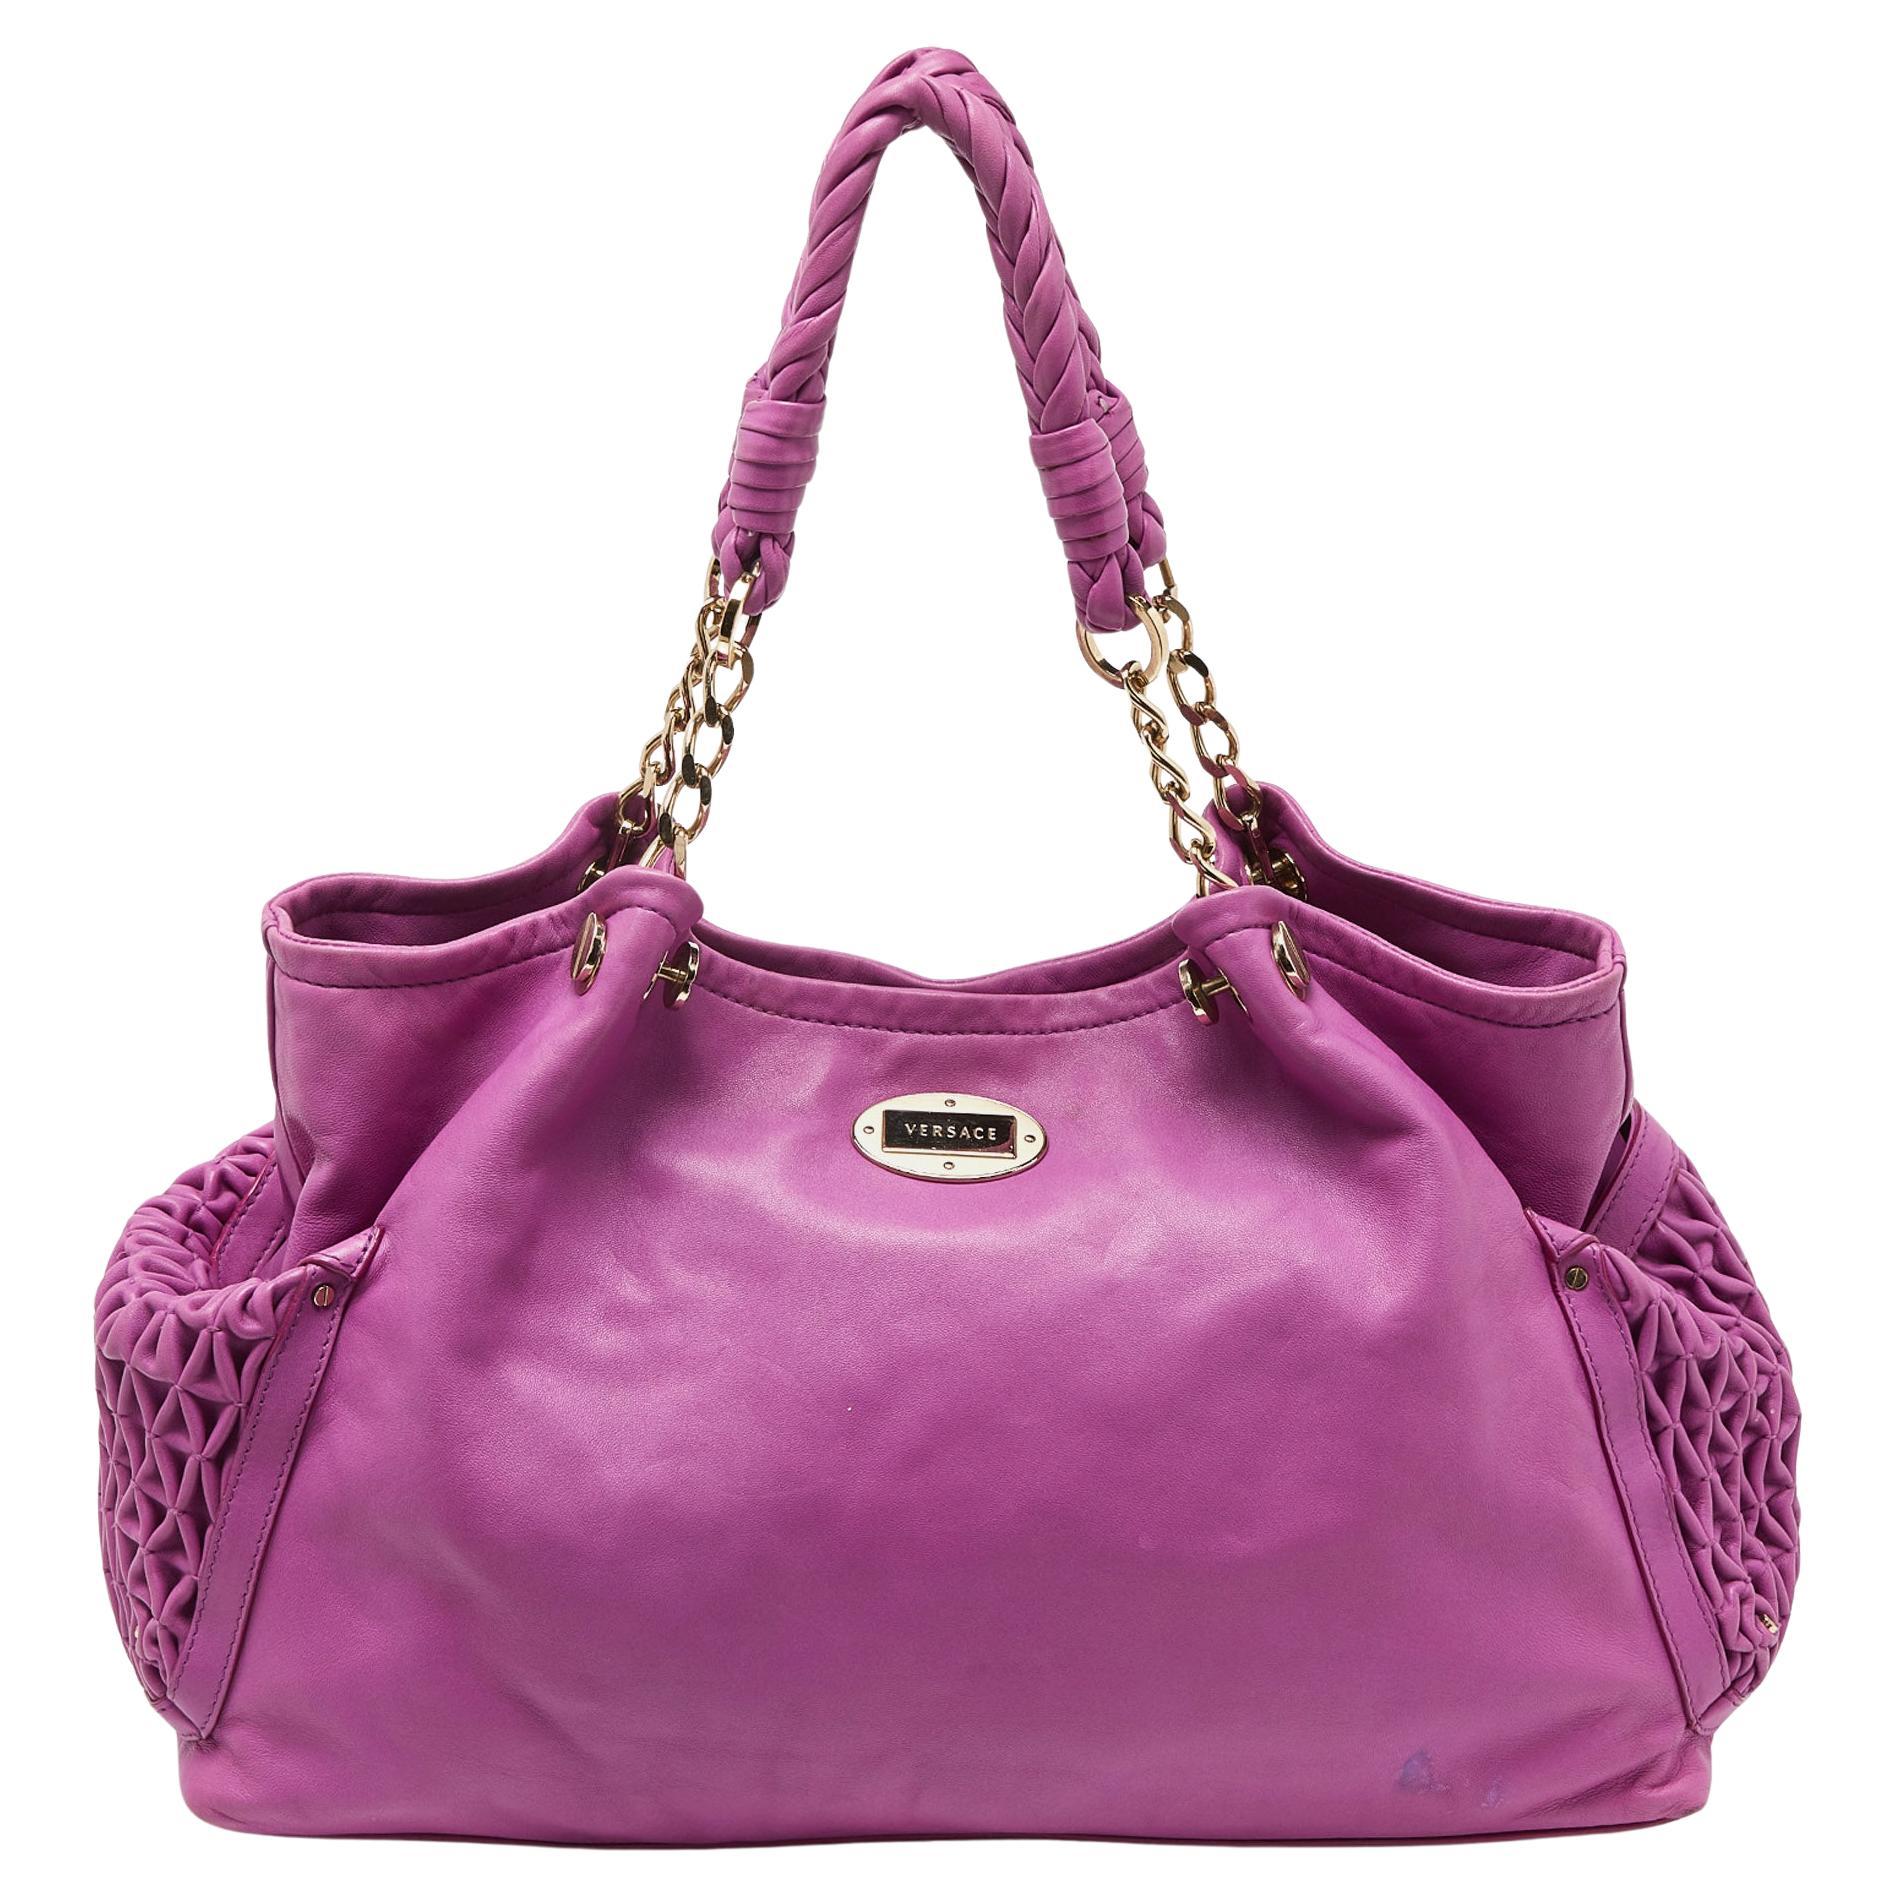 Versace Pink Pleated Leather Chain Satchel